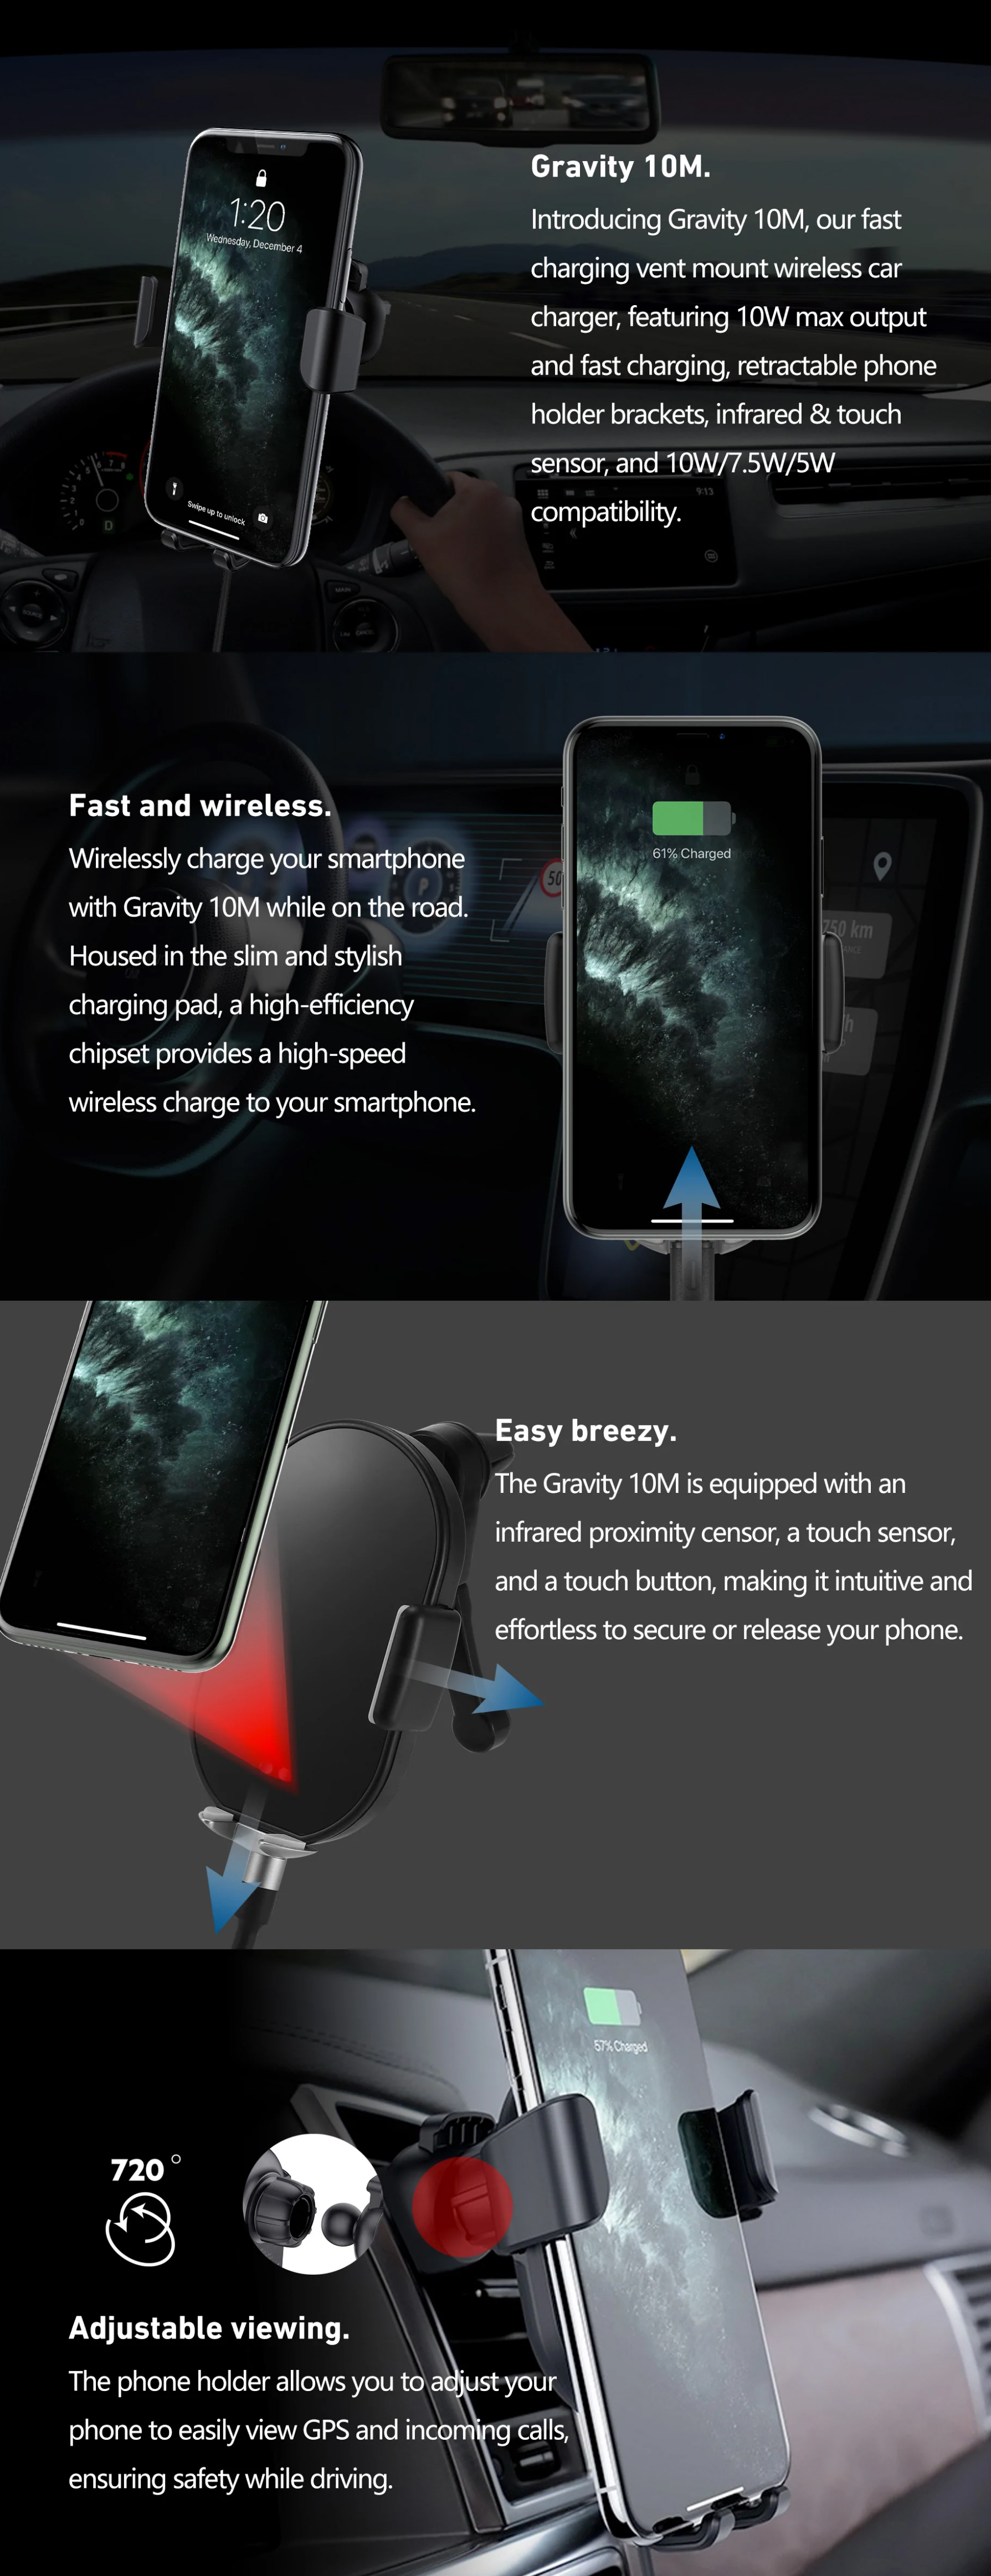 Mobile-Phone-Accessories-RockRose-Gravity-10M-10W-Wireless-Charging-Car-Phone-Mount-with-Air-Vent-Attachment-1